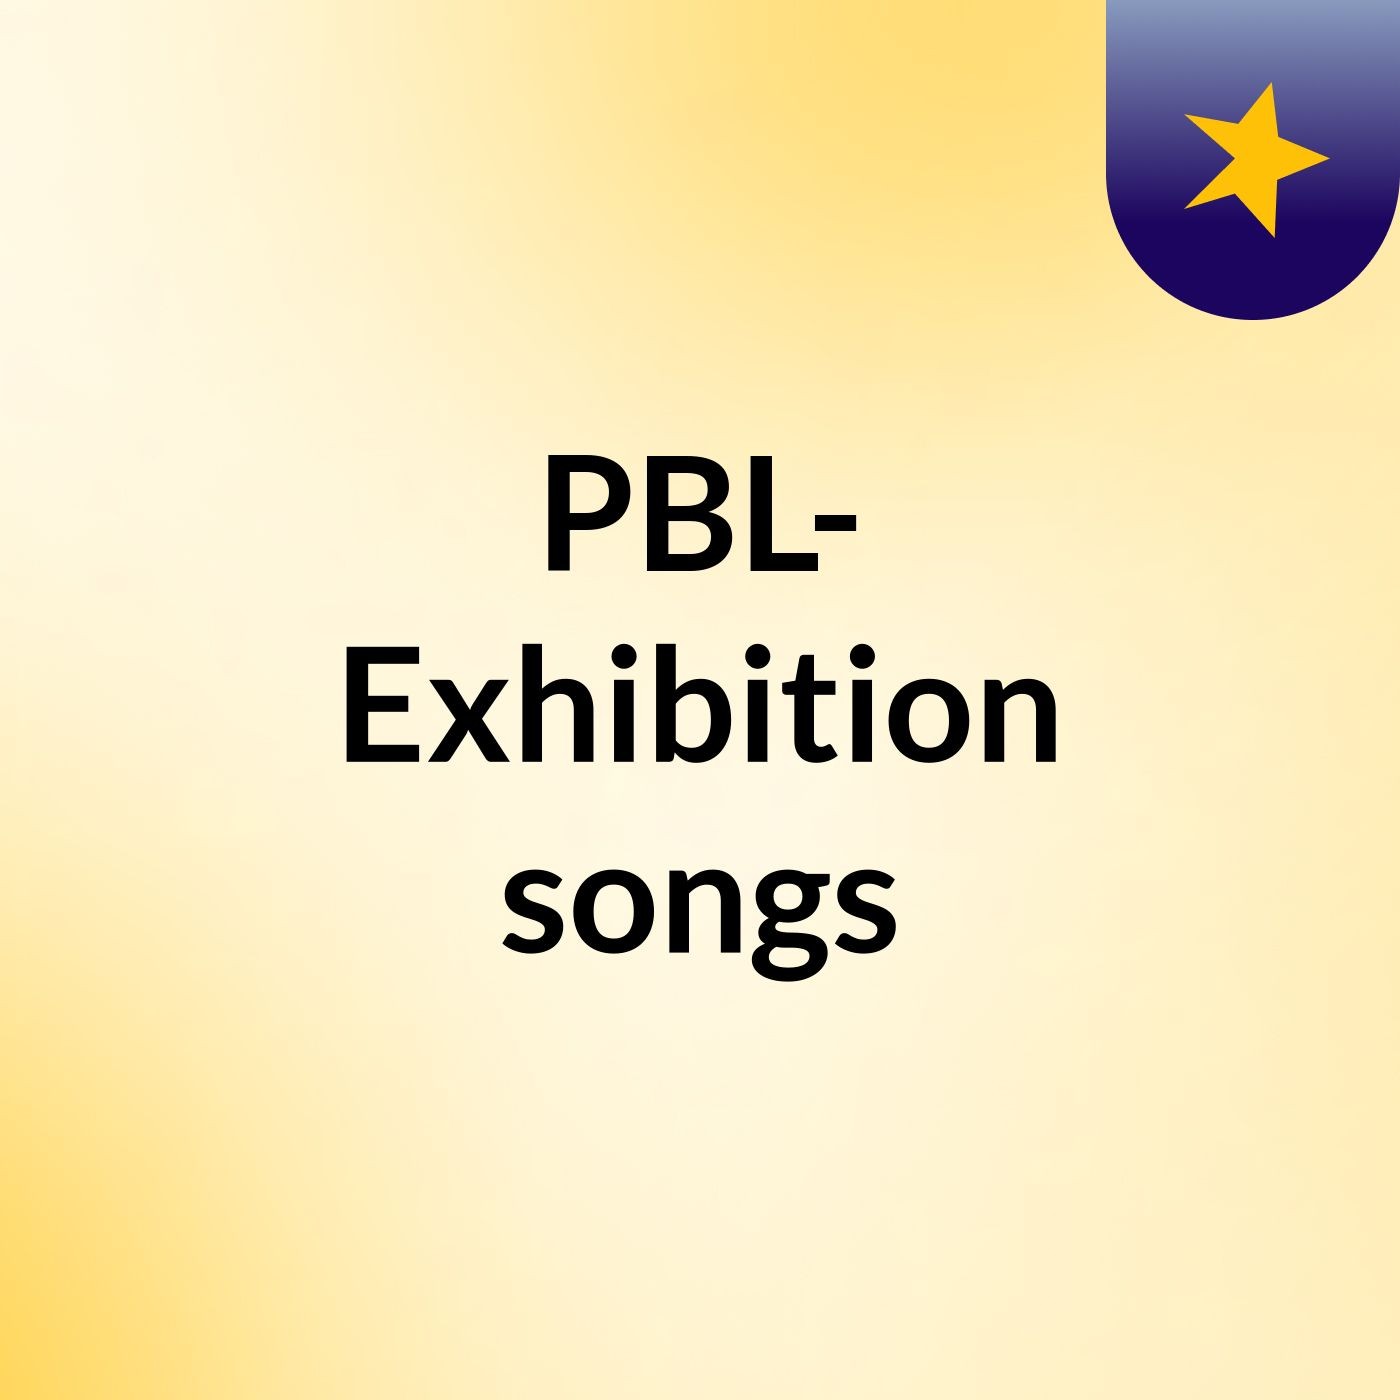 PBL- Exhibition songs